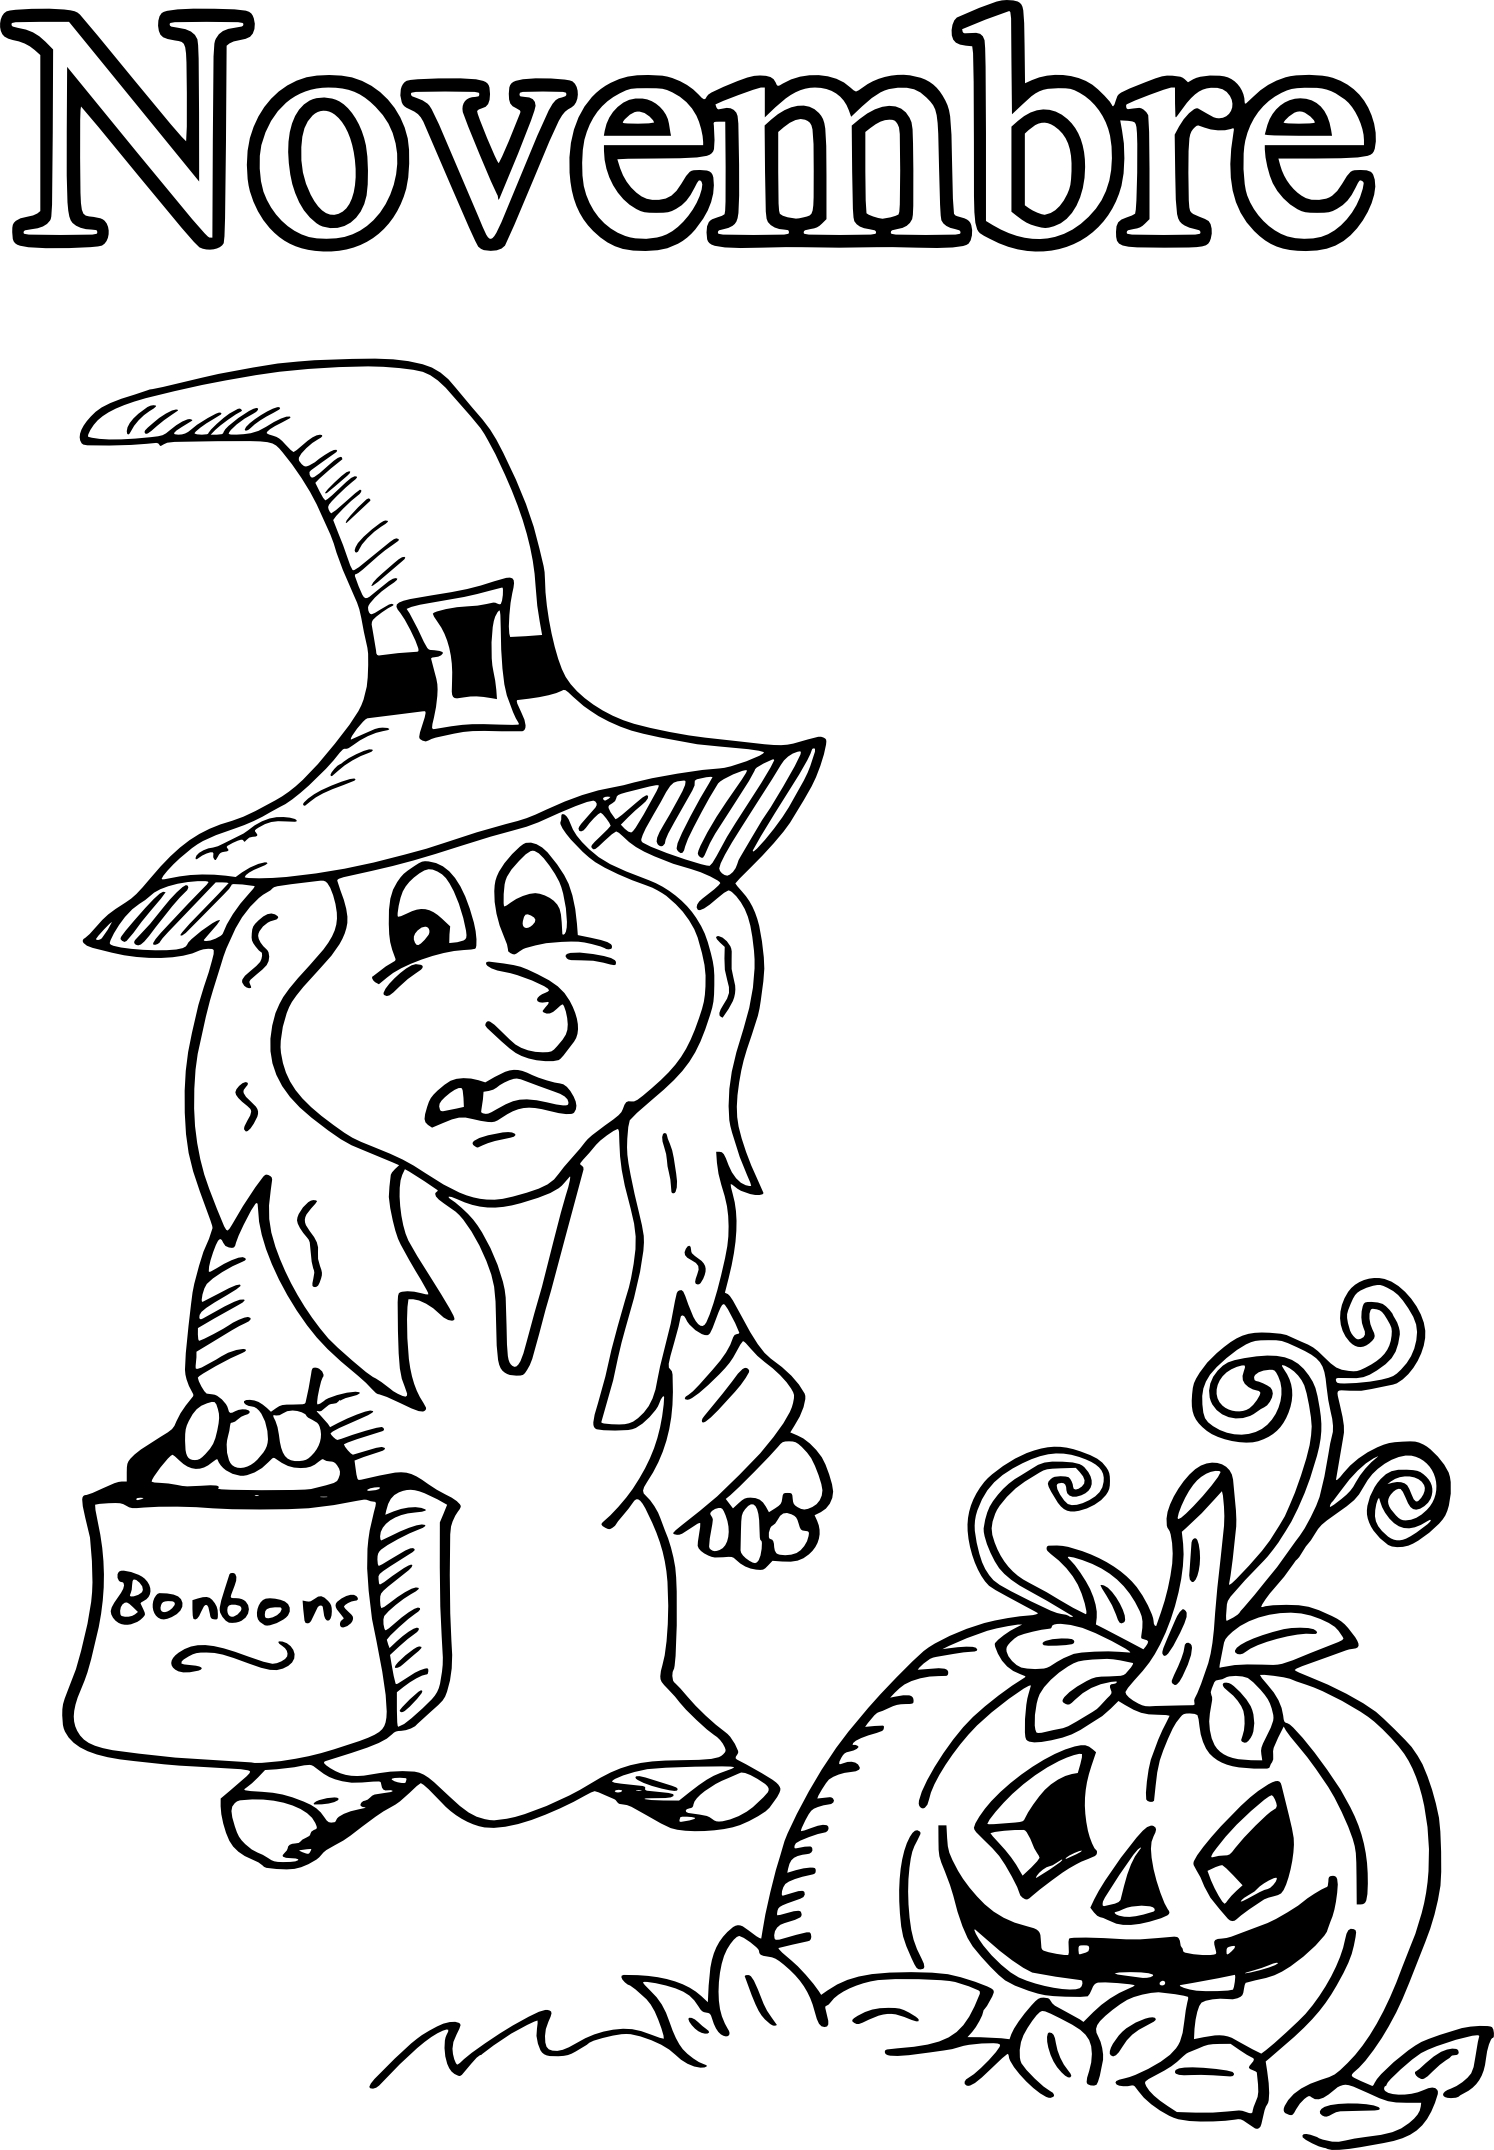 Month Of November coloring page